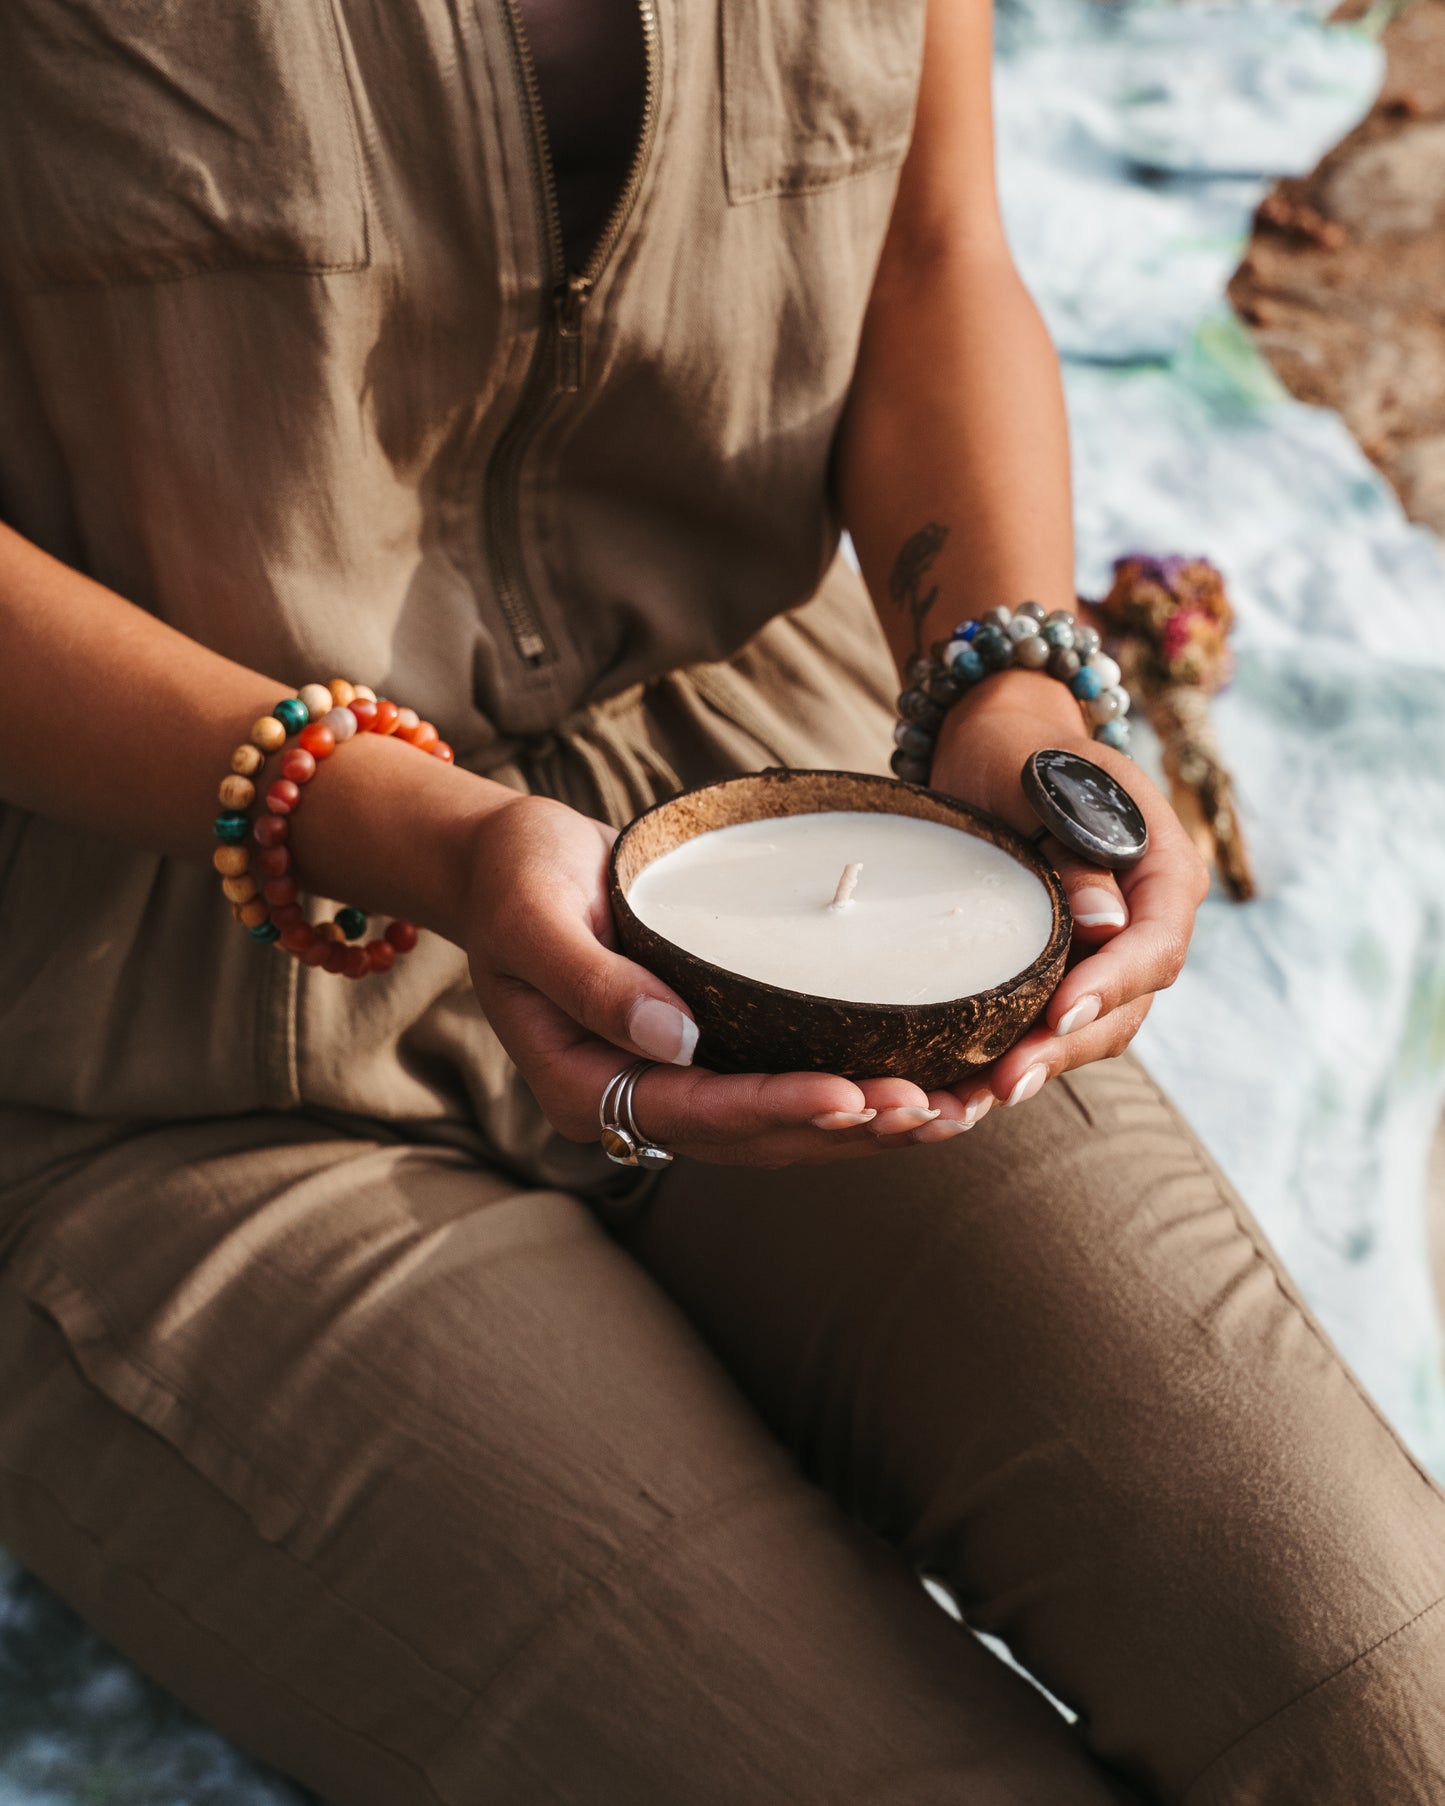 Coco Candle | Tropical Vacation - hand poured soy and coconut wax candle in a reusable natural coconut shell